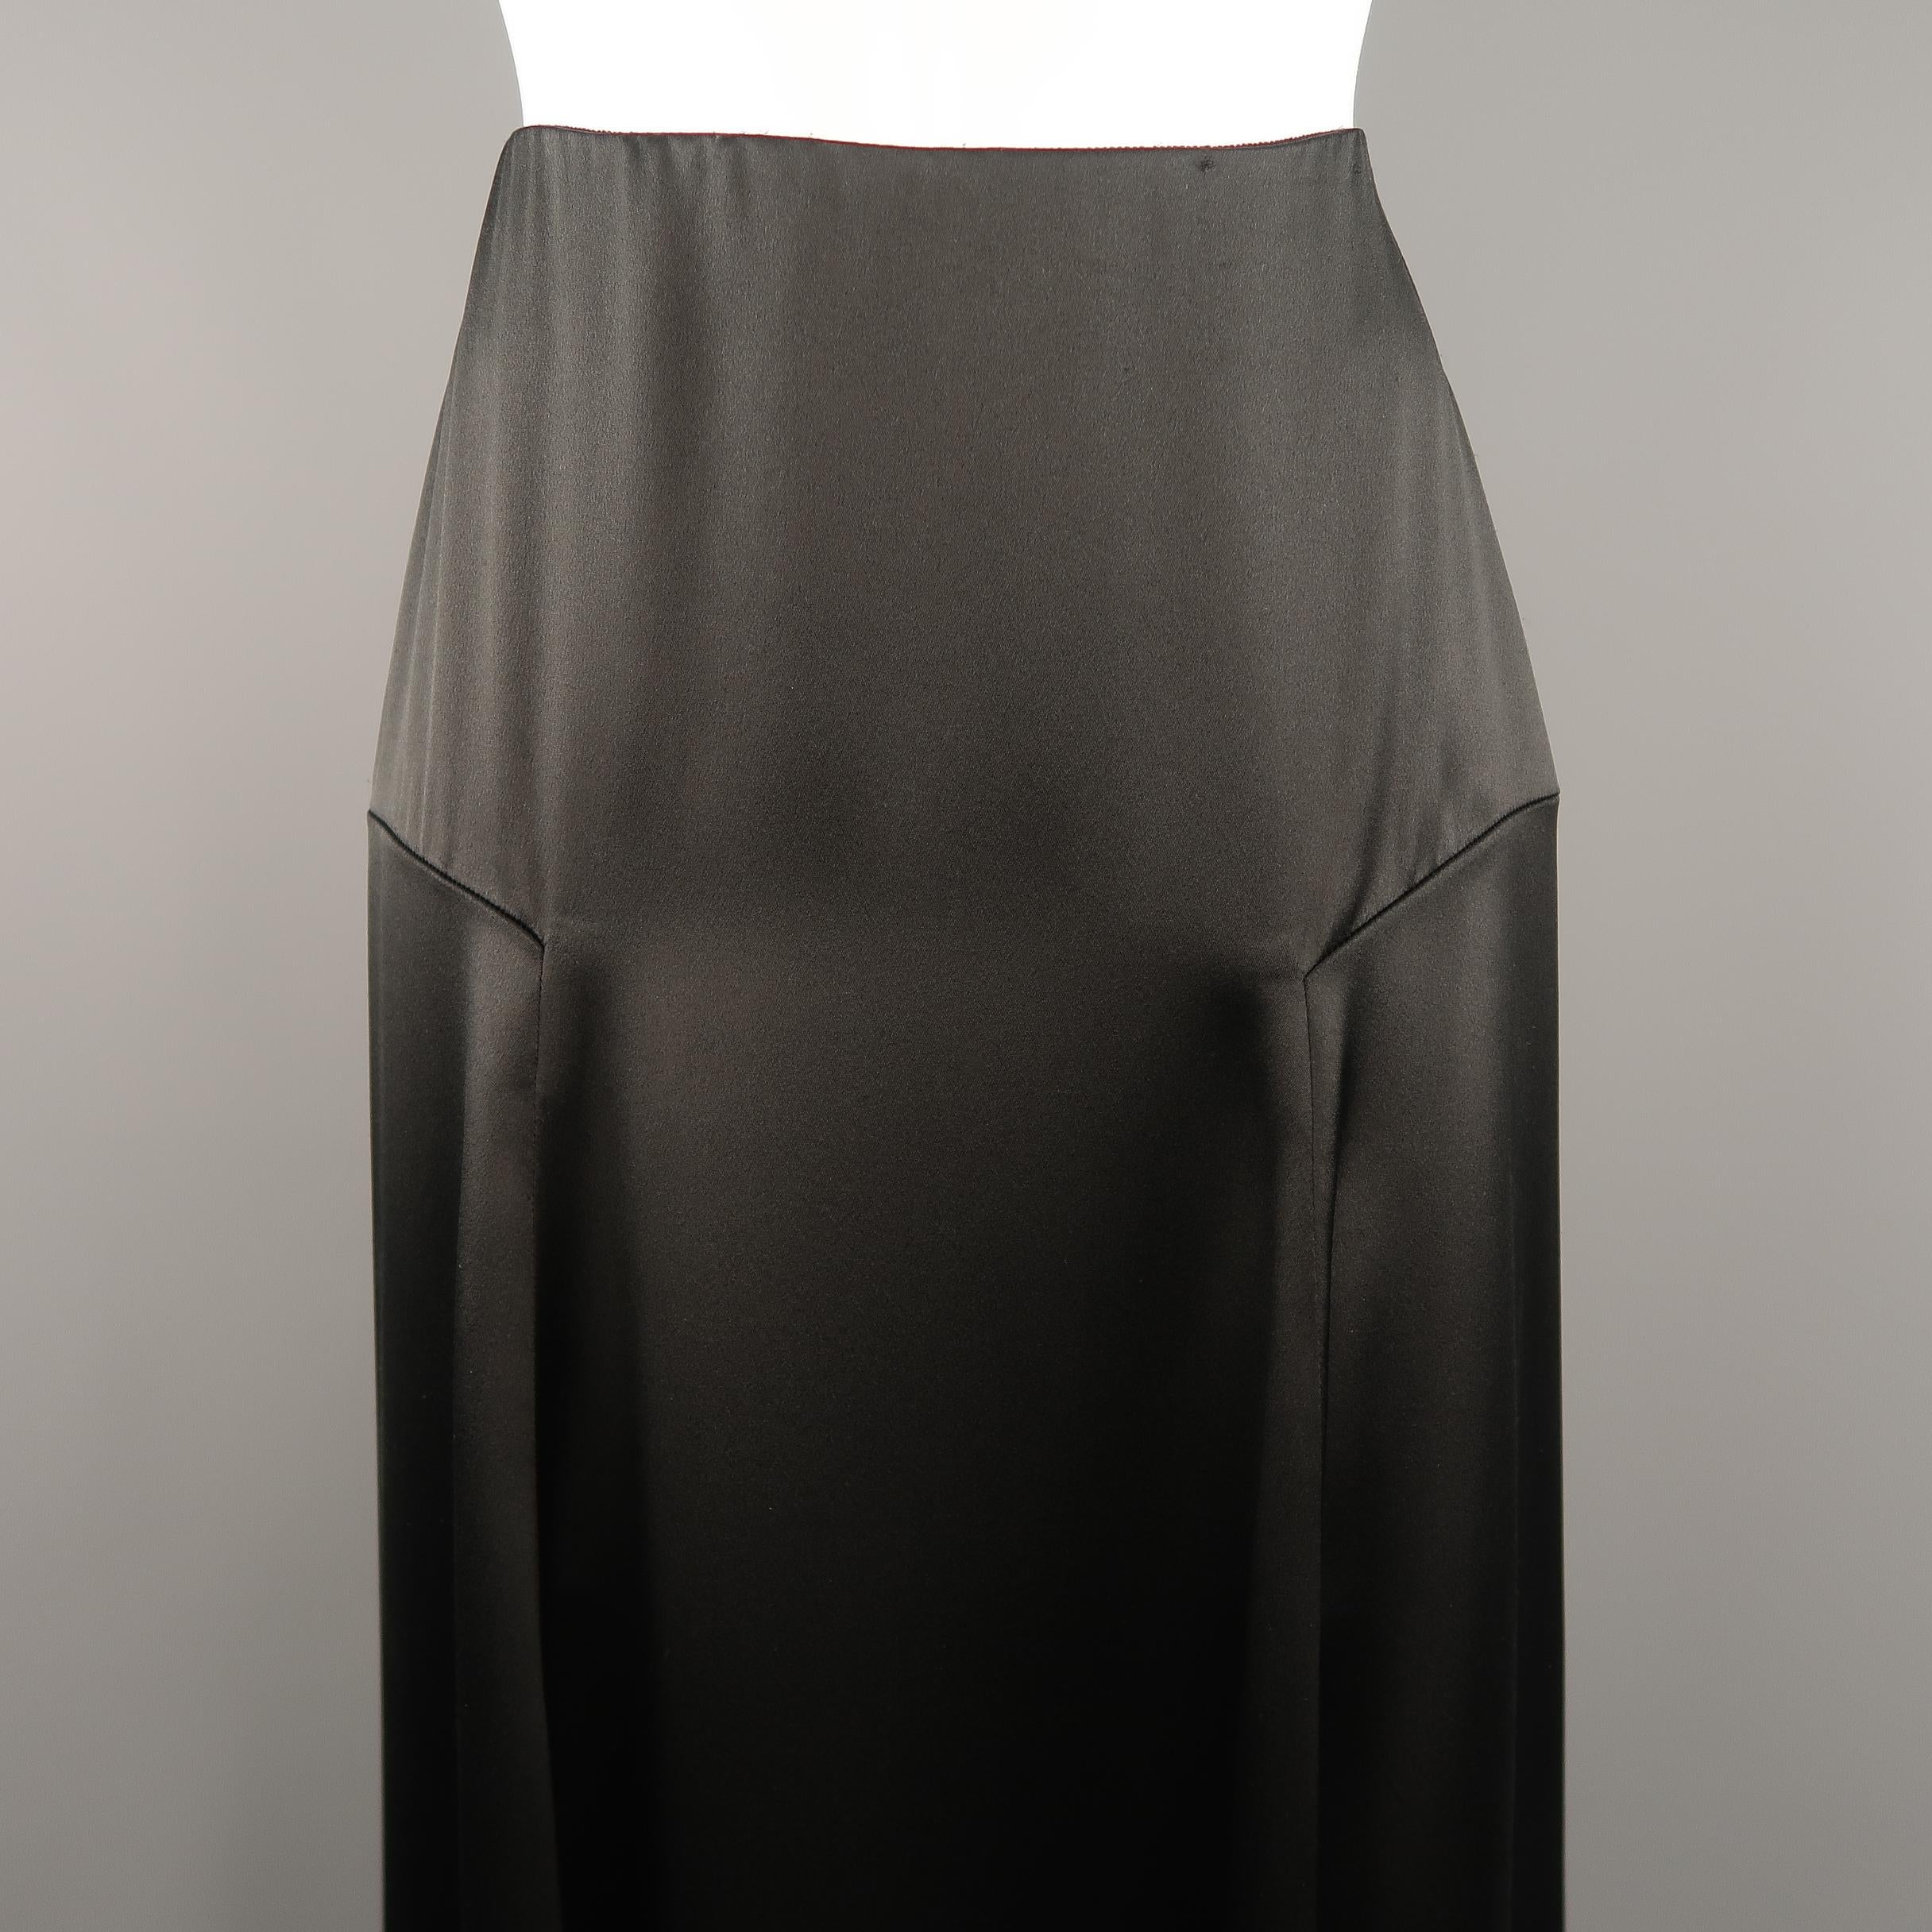 RALPH LAUREN COLLECTION maxi skirt comes in silk satin with paneled dart construction and A line ruffled hem silhouette. Minor wear.Made in USA.
 
Very Good Pre-Owned Condition.
Marked: 2
 
Measurements:
 
Waist: 26.5 in.
Hip: 36 in.
Length: 40-46